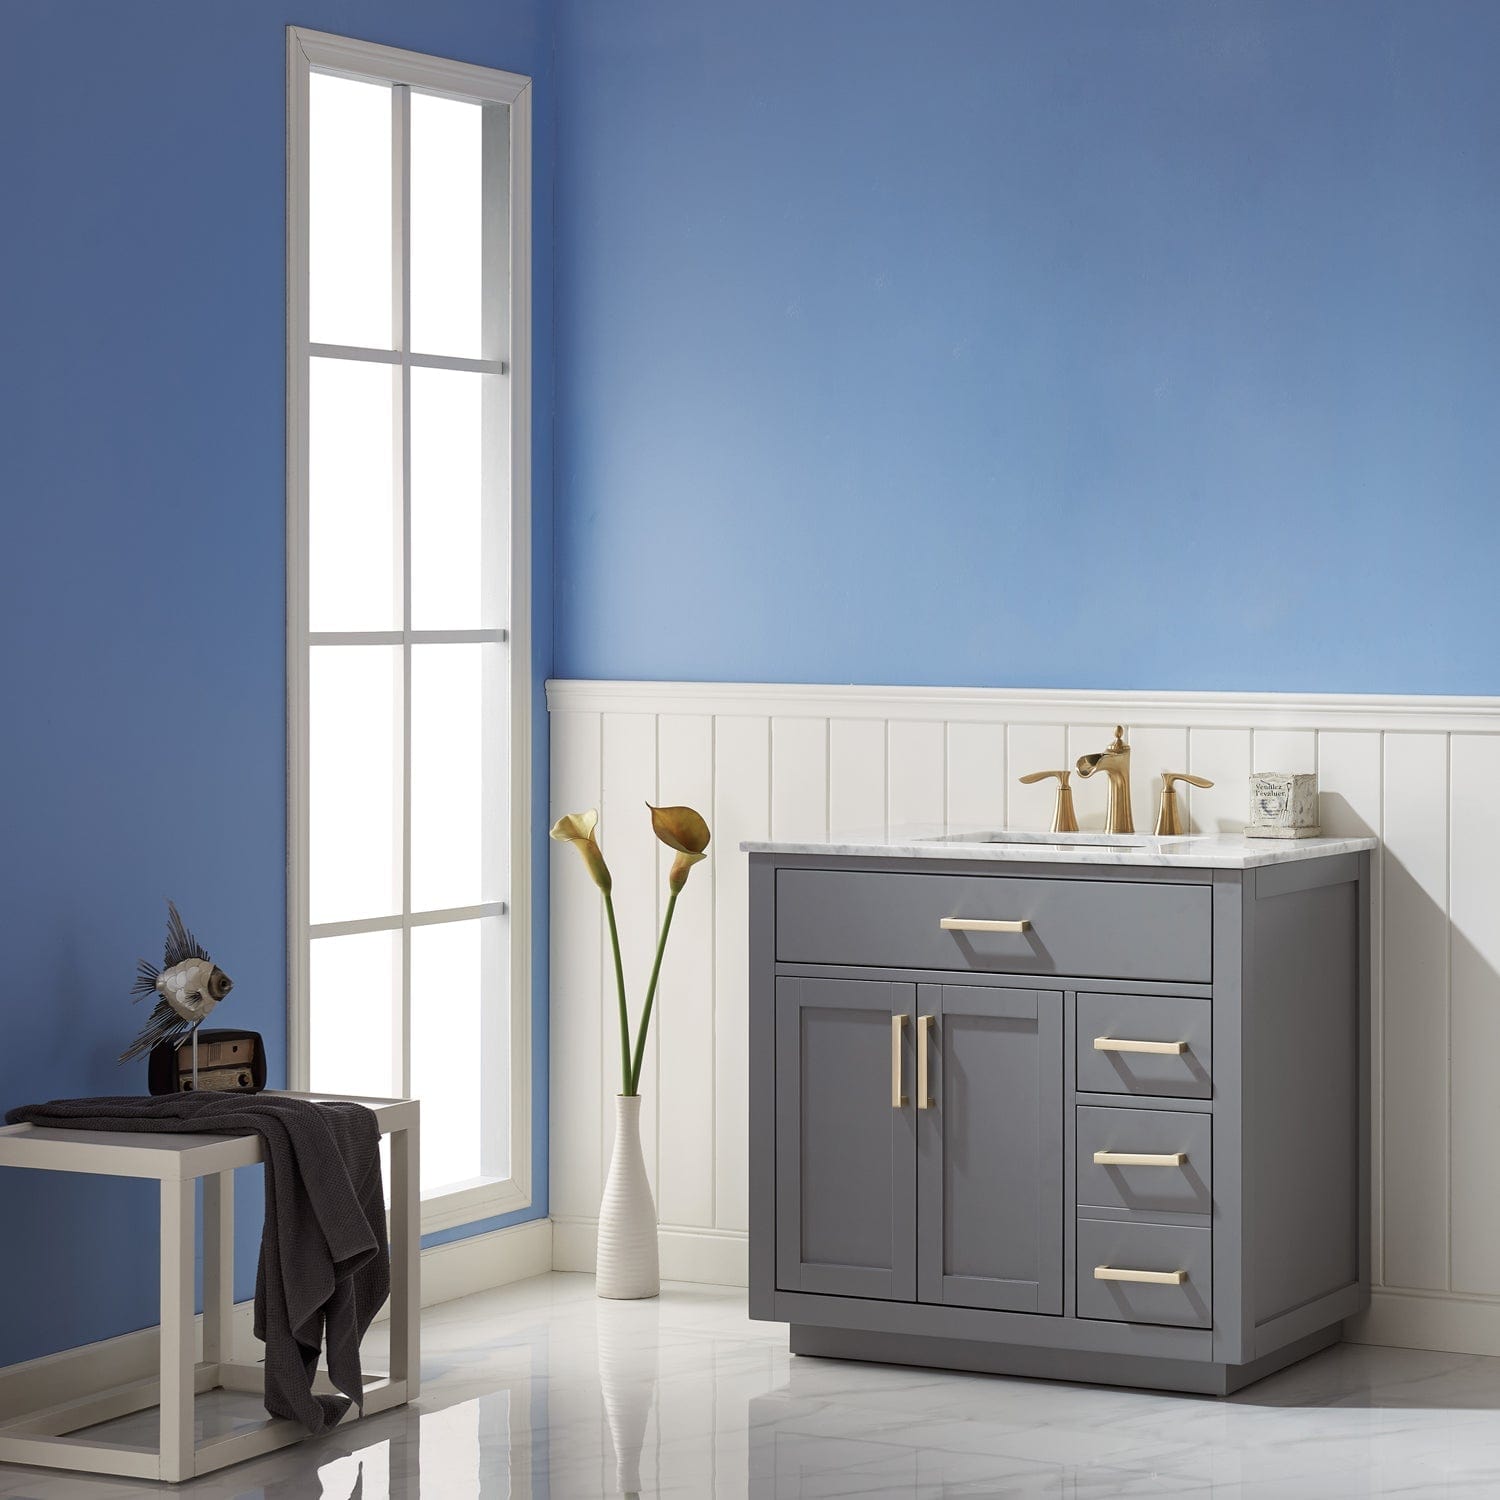 Altair Ivy 36" Single Bathroom Vanity Set in Gray and Carrara White Marble Countertop without Mirror 531036-GR-CA-NM - Molaix631112971102Vanity531036-GR-CA-NM